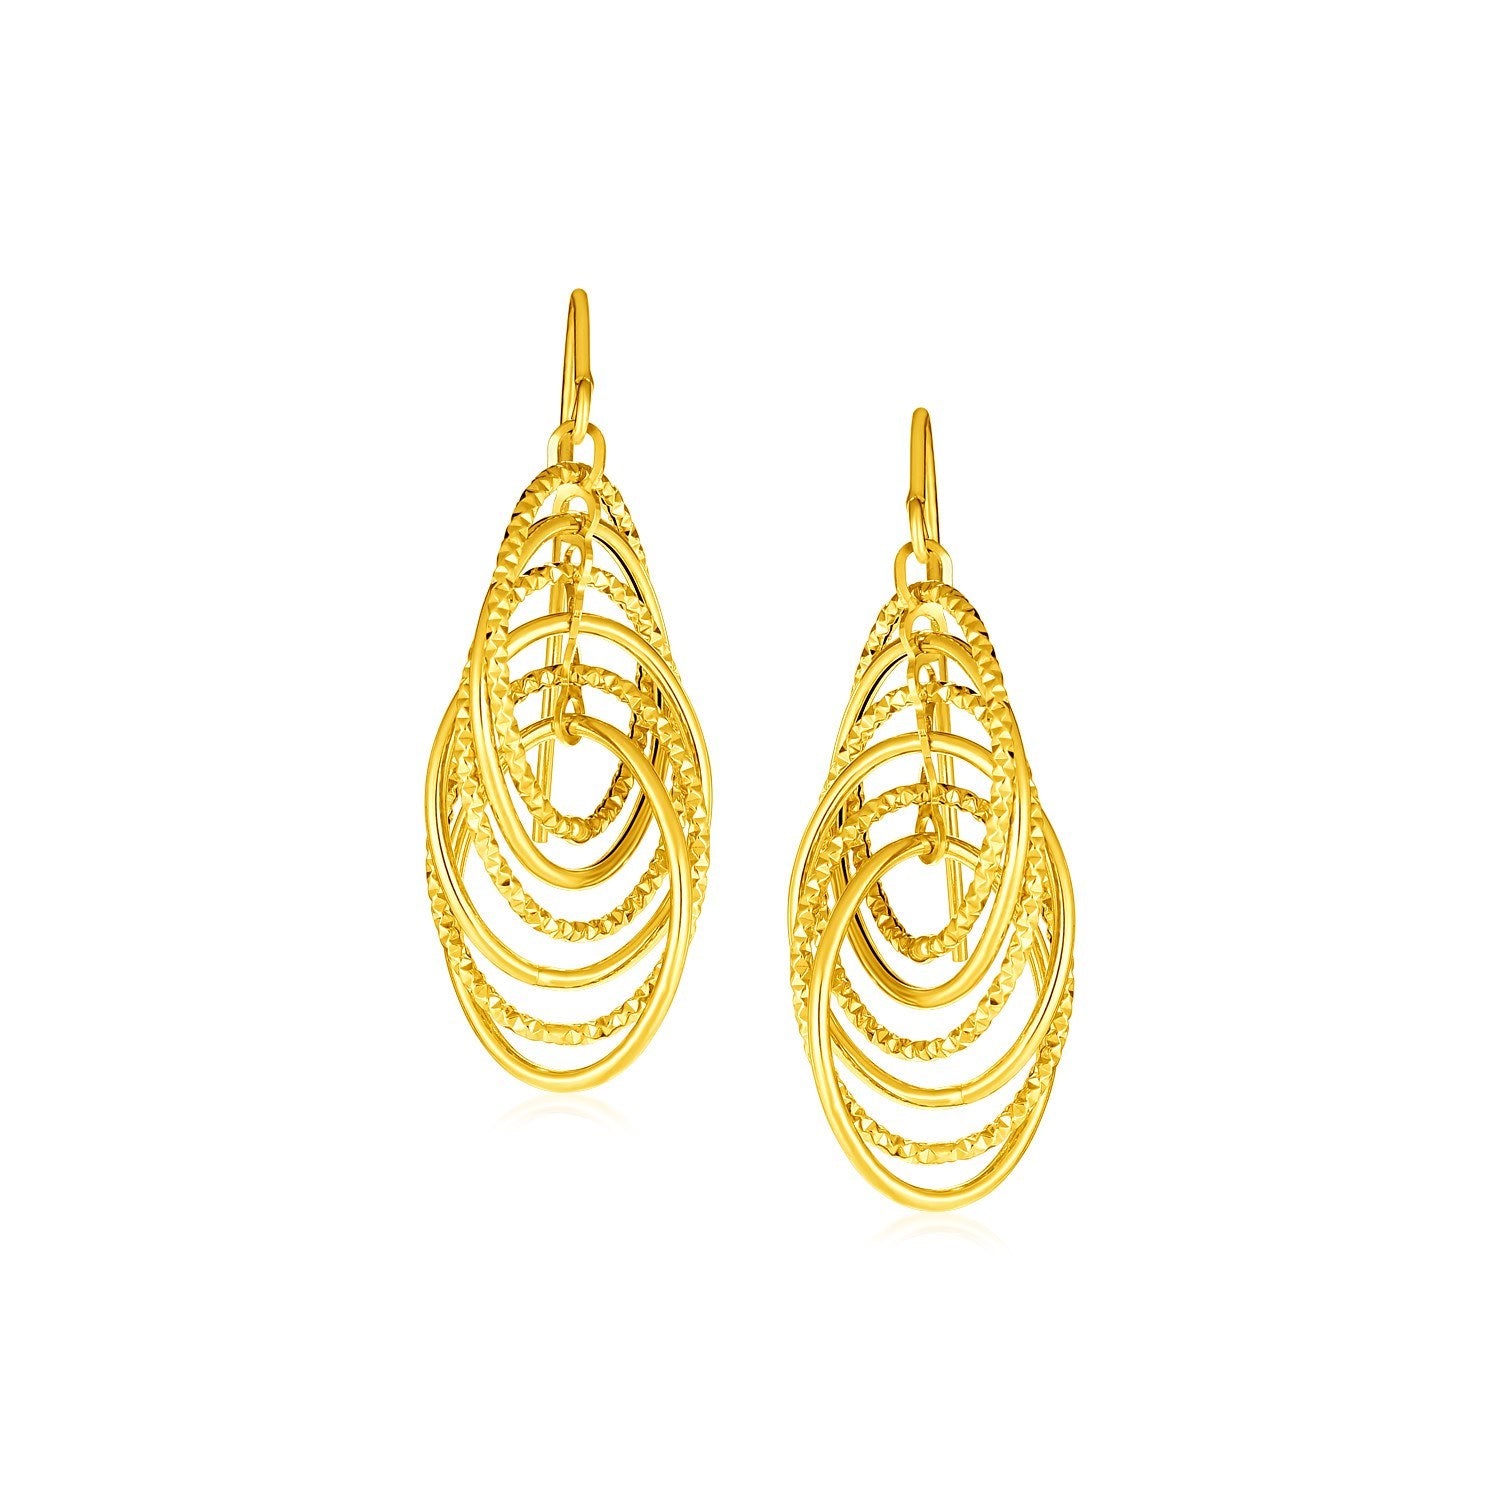 Earrings with Graduated Spiral Dangles